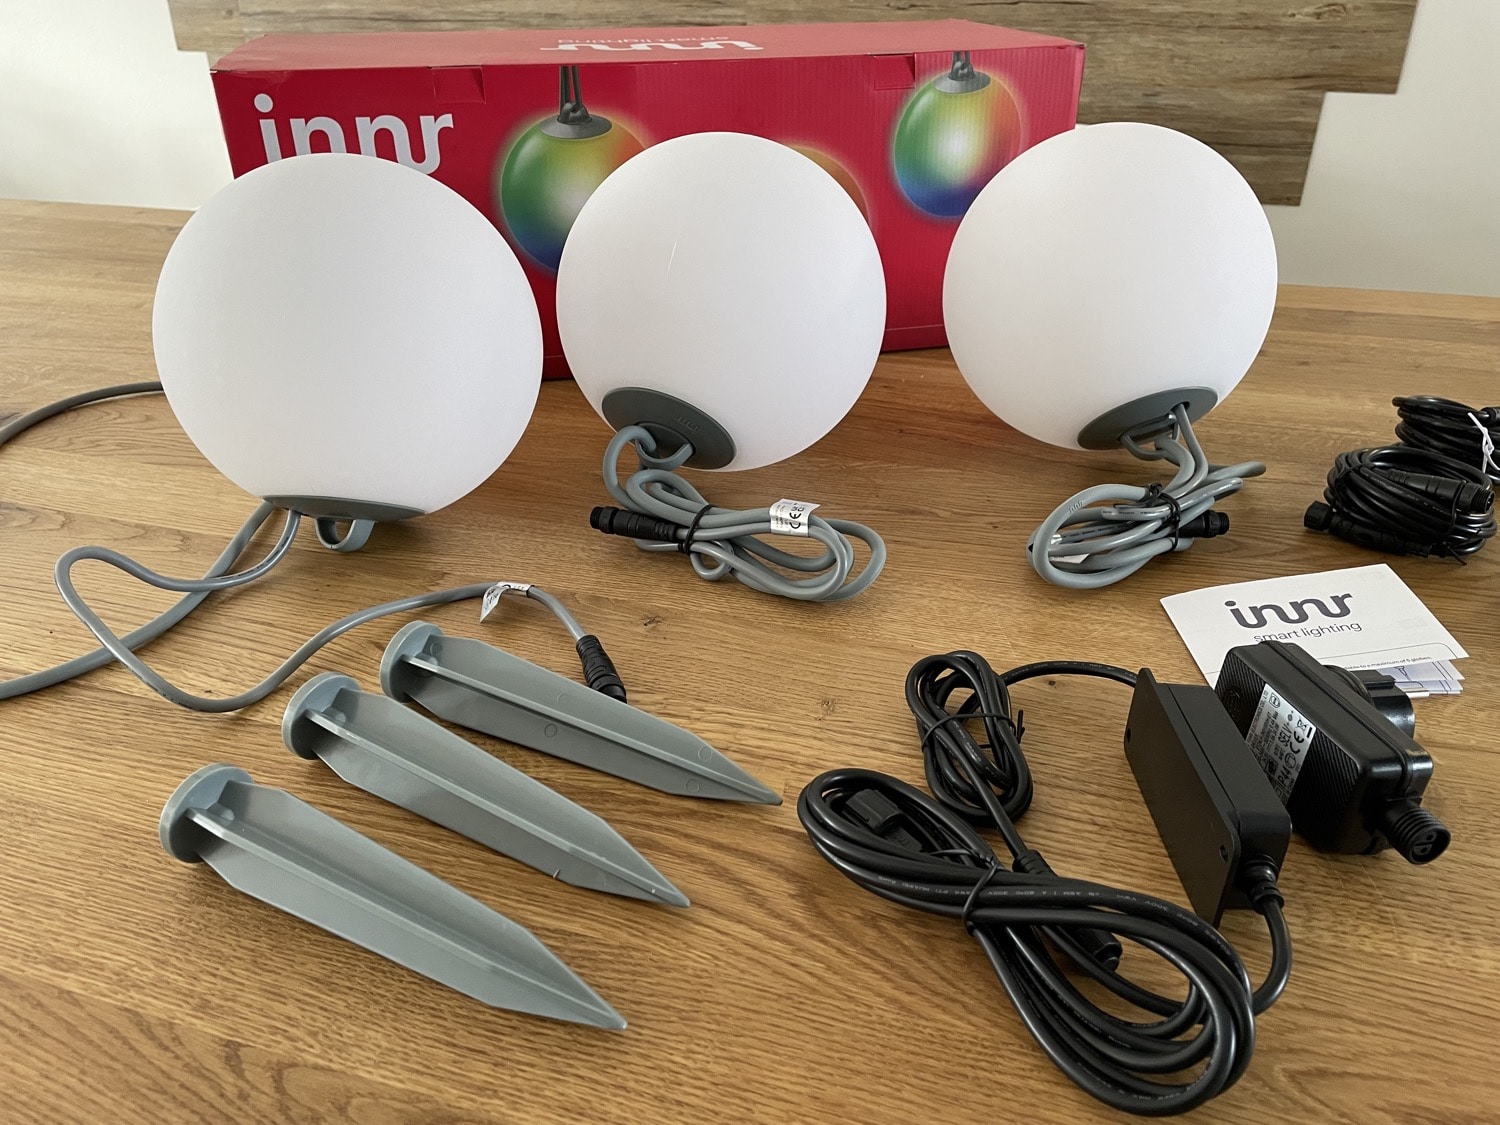 Innr smart lighting review: Innr's Zigbee bulbs and system put to